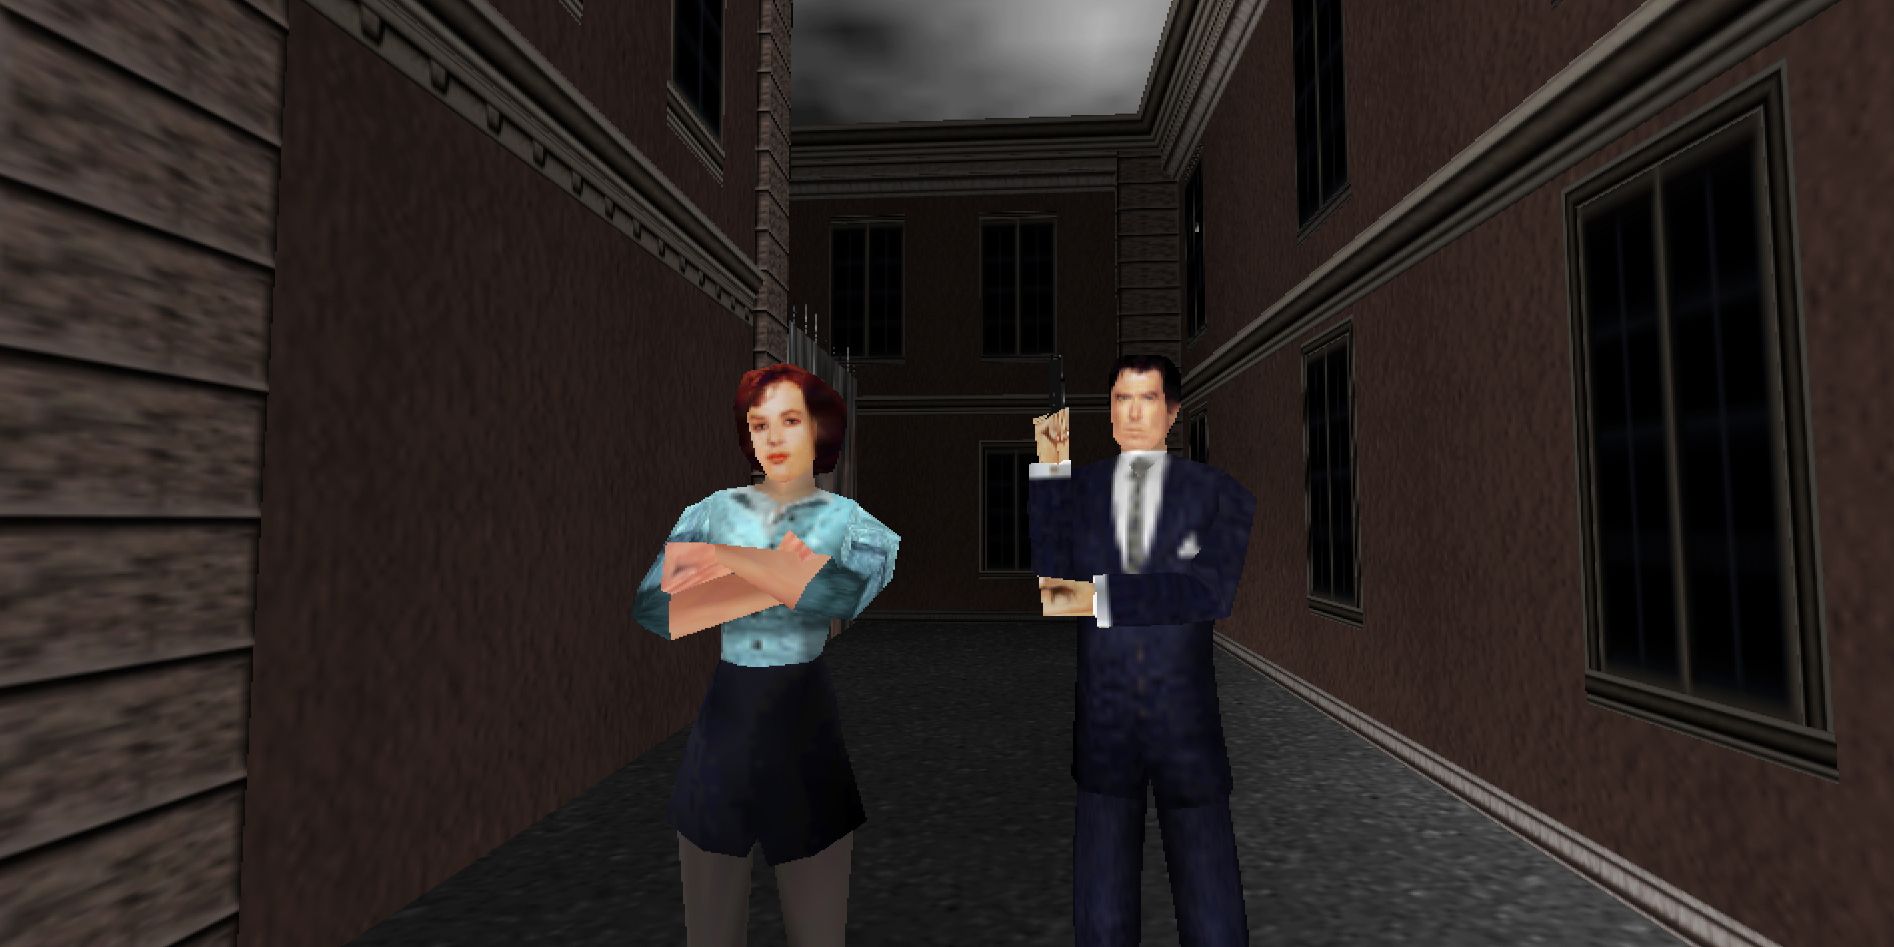 James Bond and Natalya Simonova strike a confident pose in an alleyway in a high-definition screenshot from GoldenEye 007